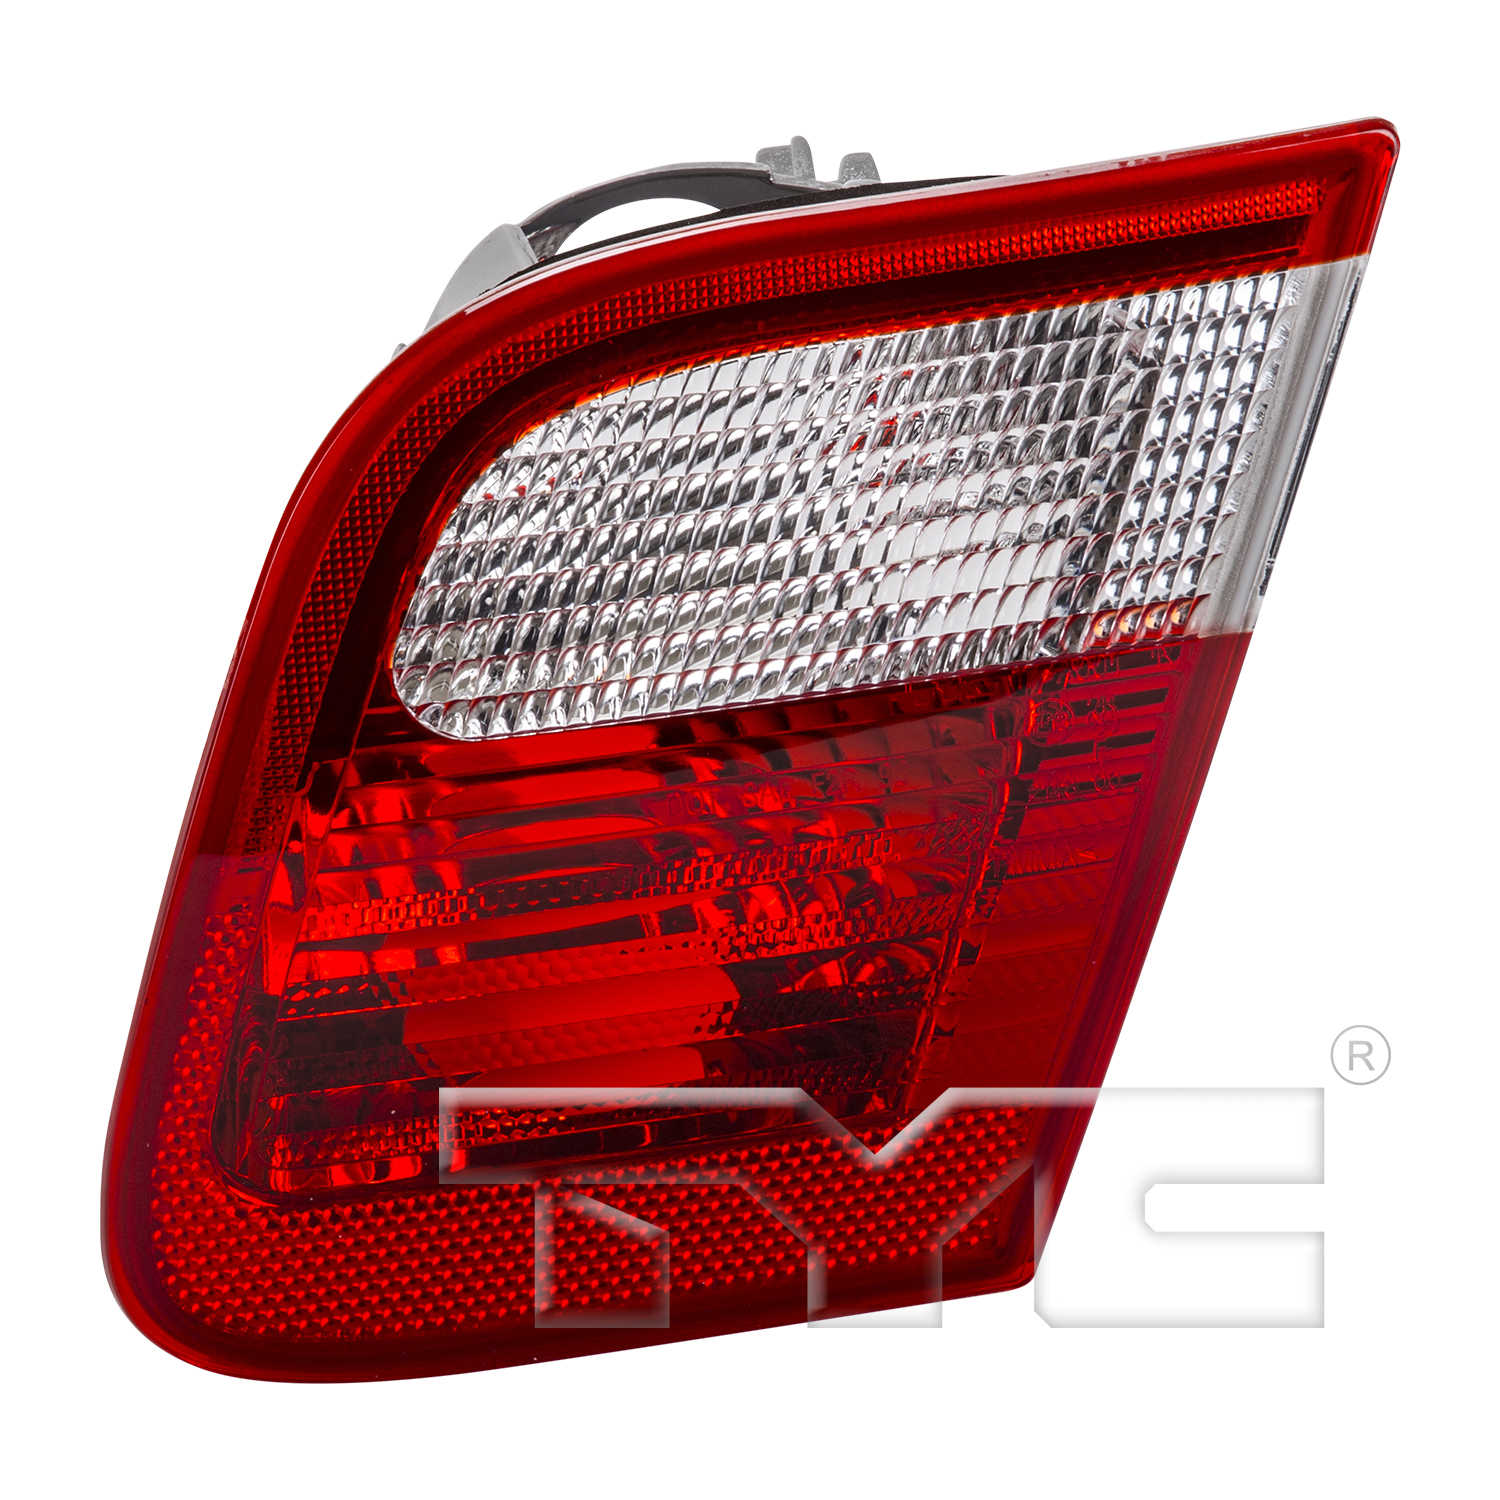 Aftermarket TAILLIGHTS for BMW - 323I, 323i,99-00,RT Back up lamp assy